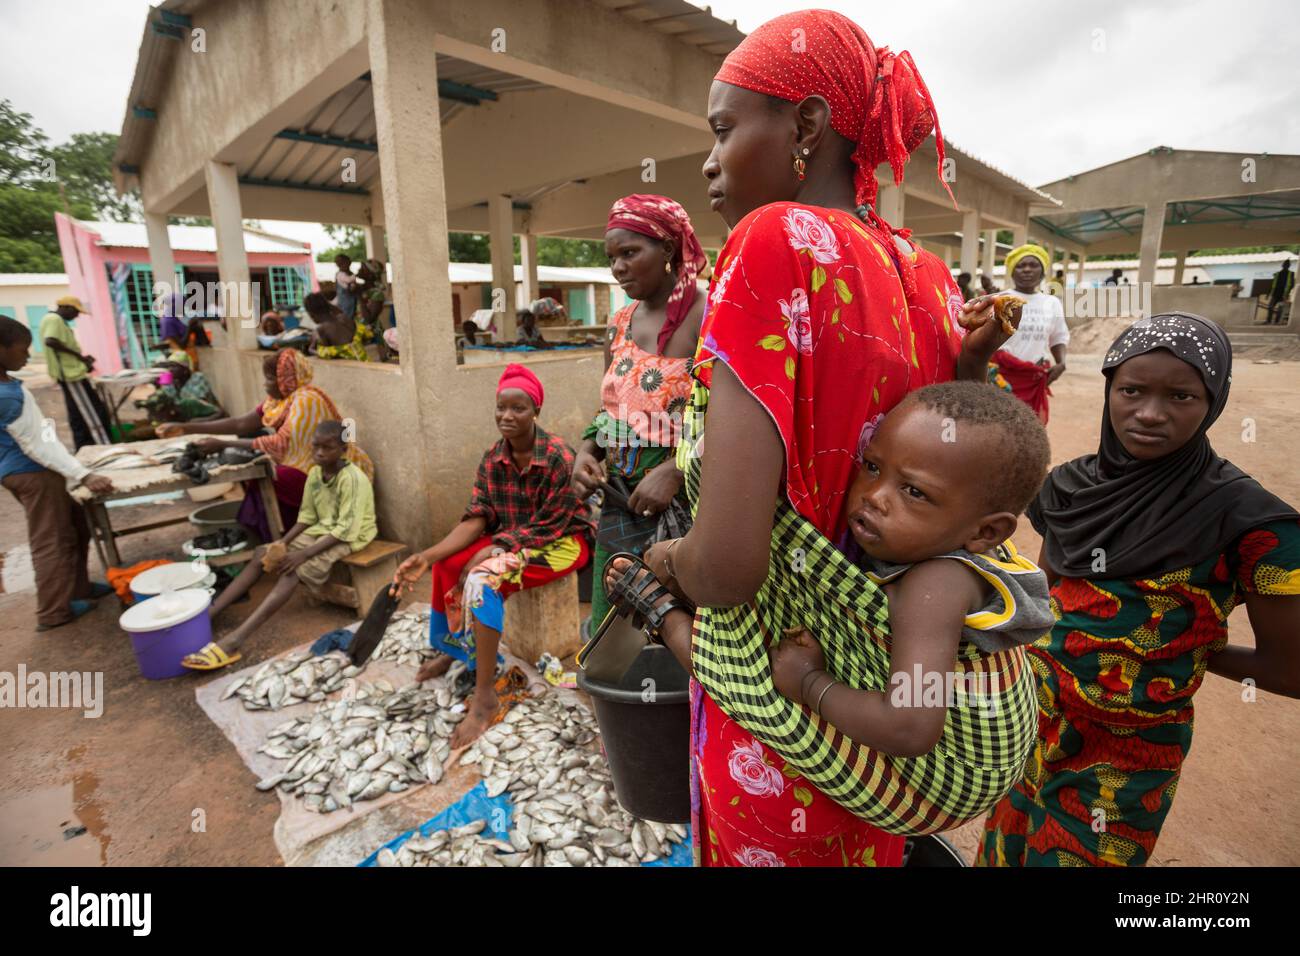 A mother carries her baby on her back while she shops for fresh fish at a market in Tanaff, Senegal, West Africa. Stock Photo